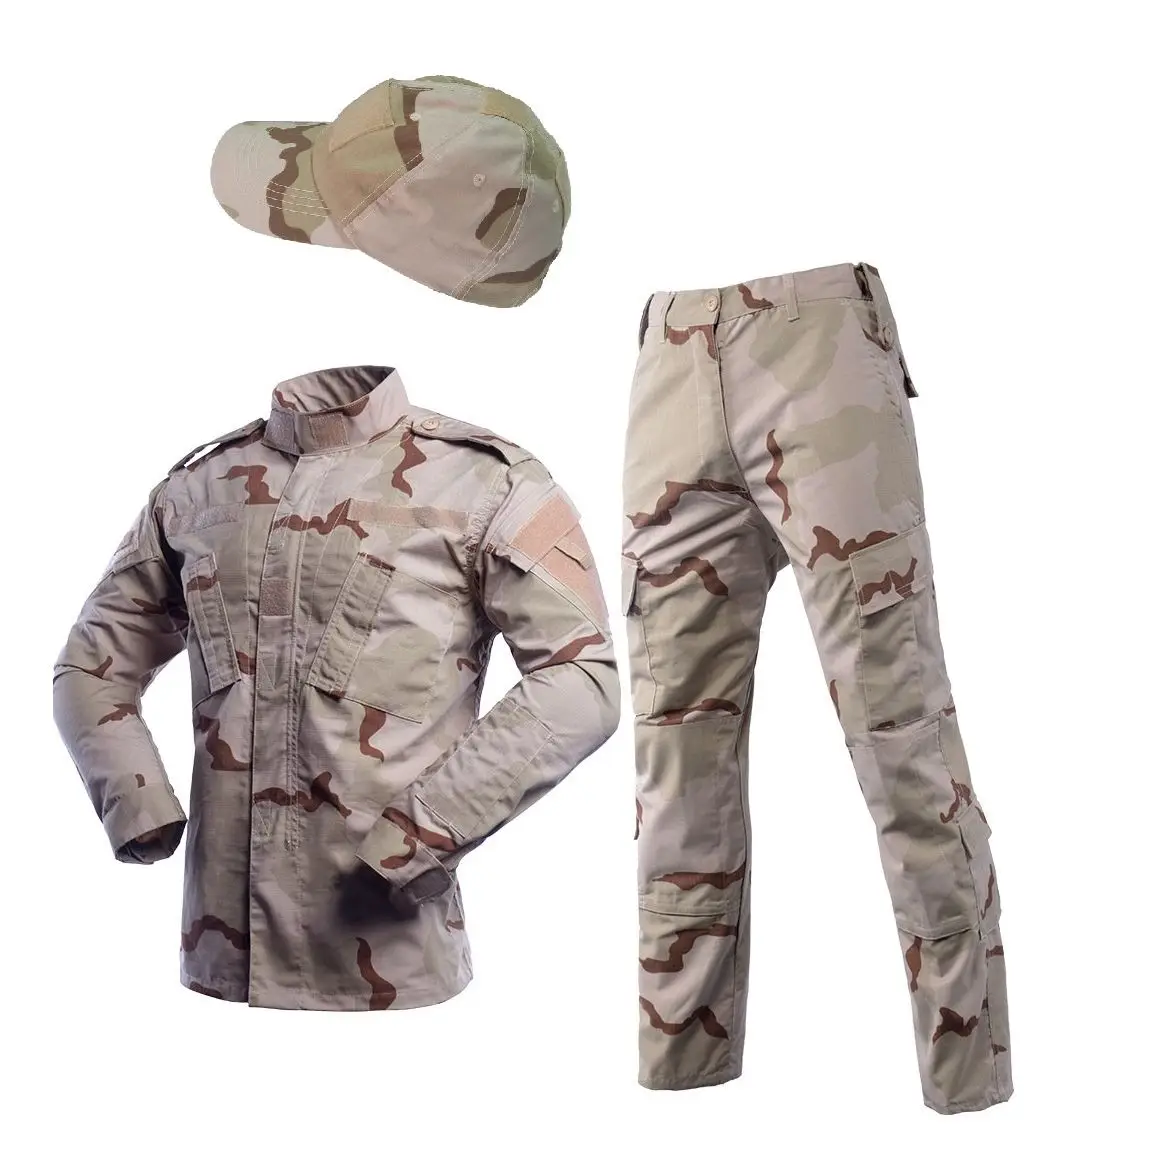 Men's Sets 3-color Desert Camouflage ACU Military Uiforms With Tactical Verclo Baseball Hat